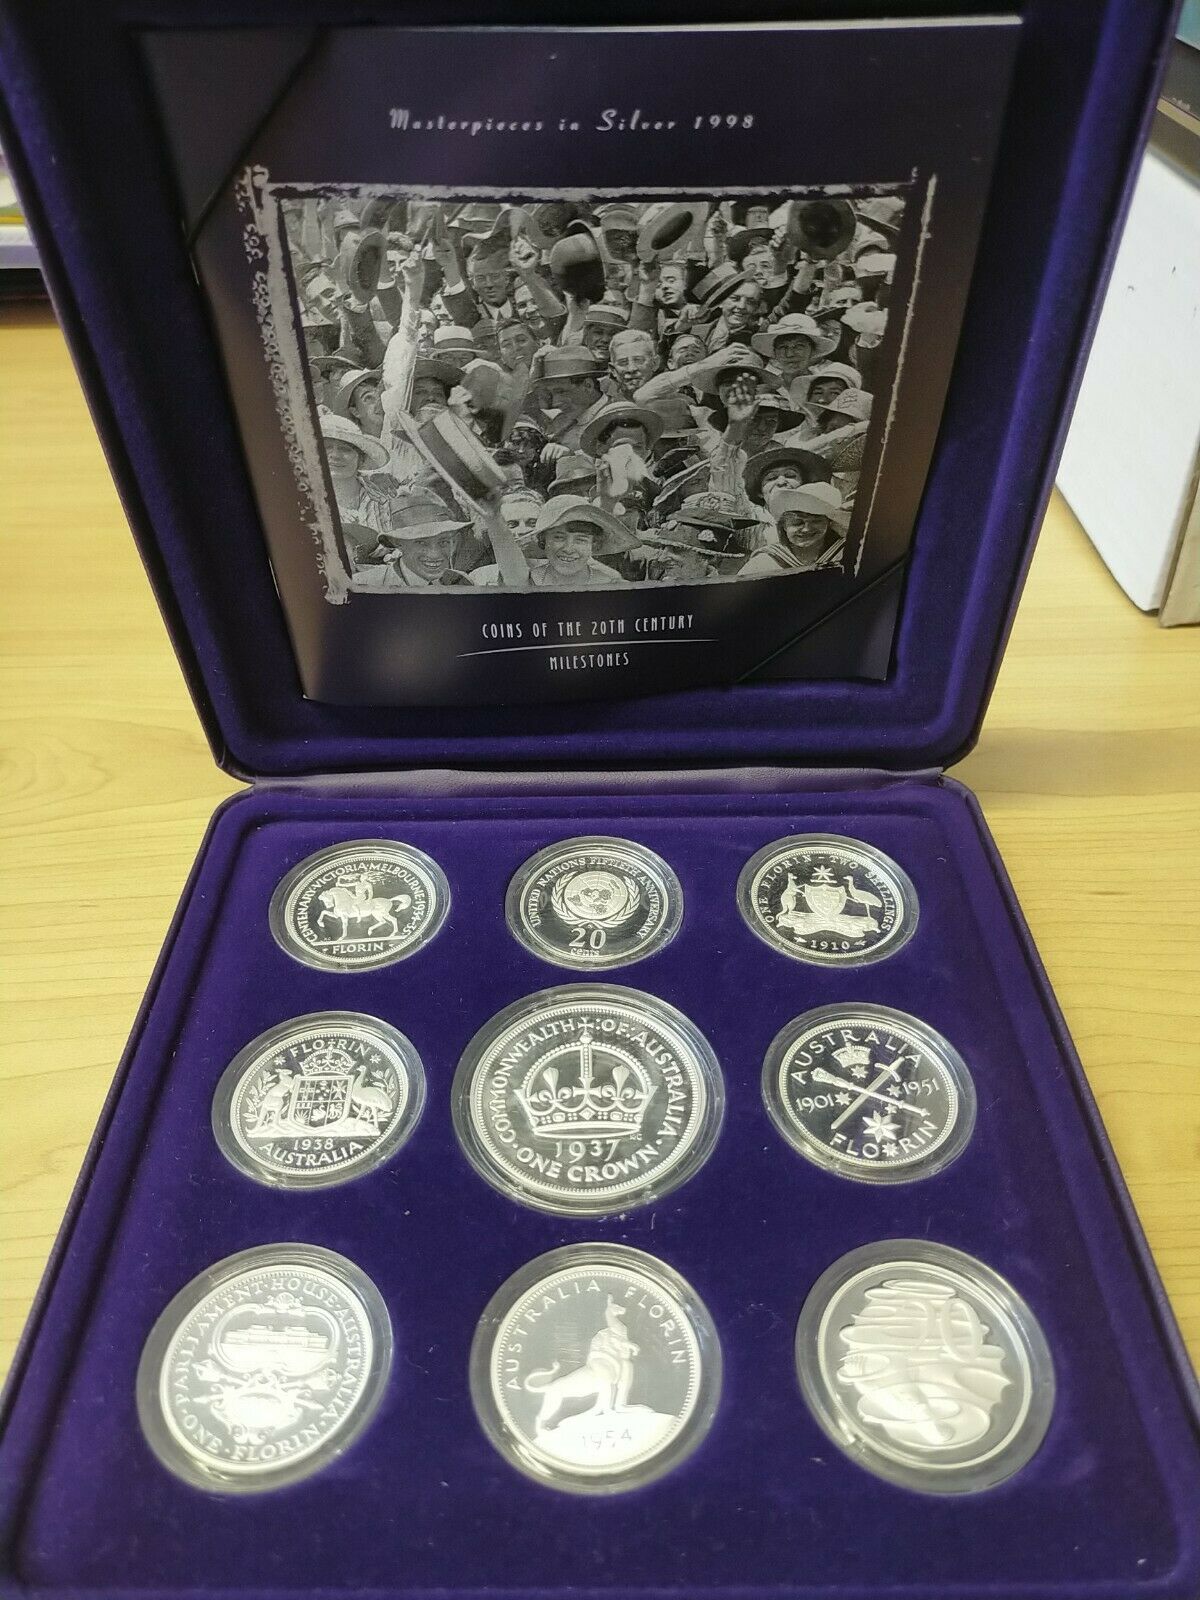 1998 Royal Australian Mint Masterpieces In Silver .999 Proof 9 Coin Set 20th Century Milestones